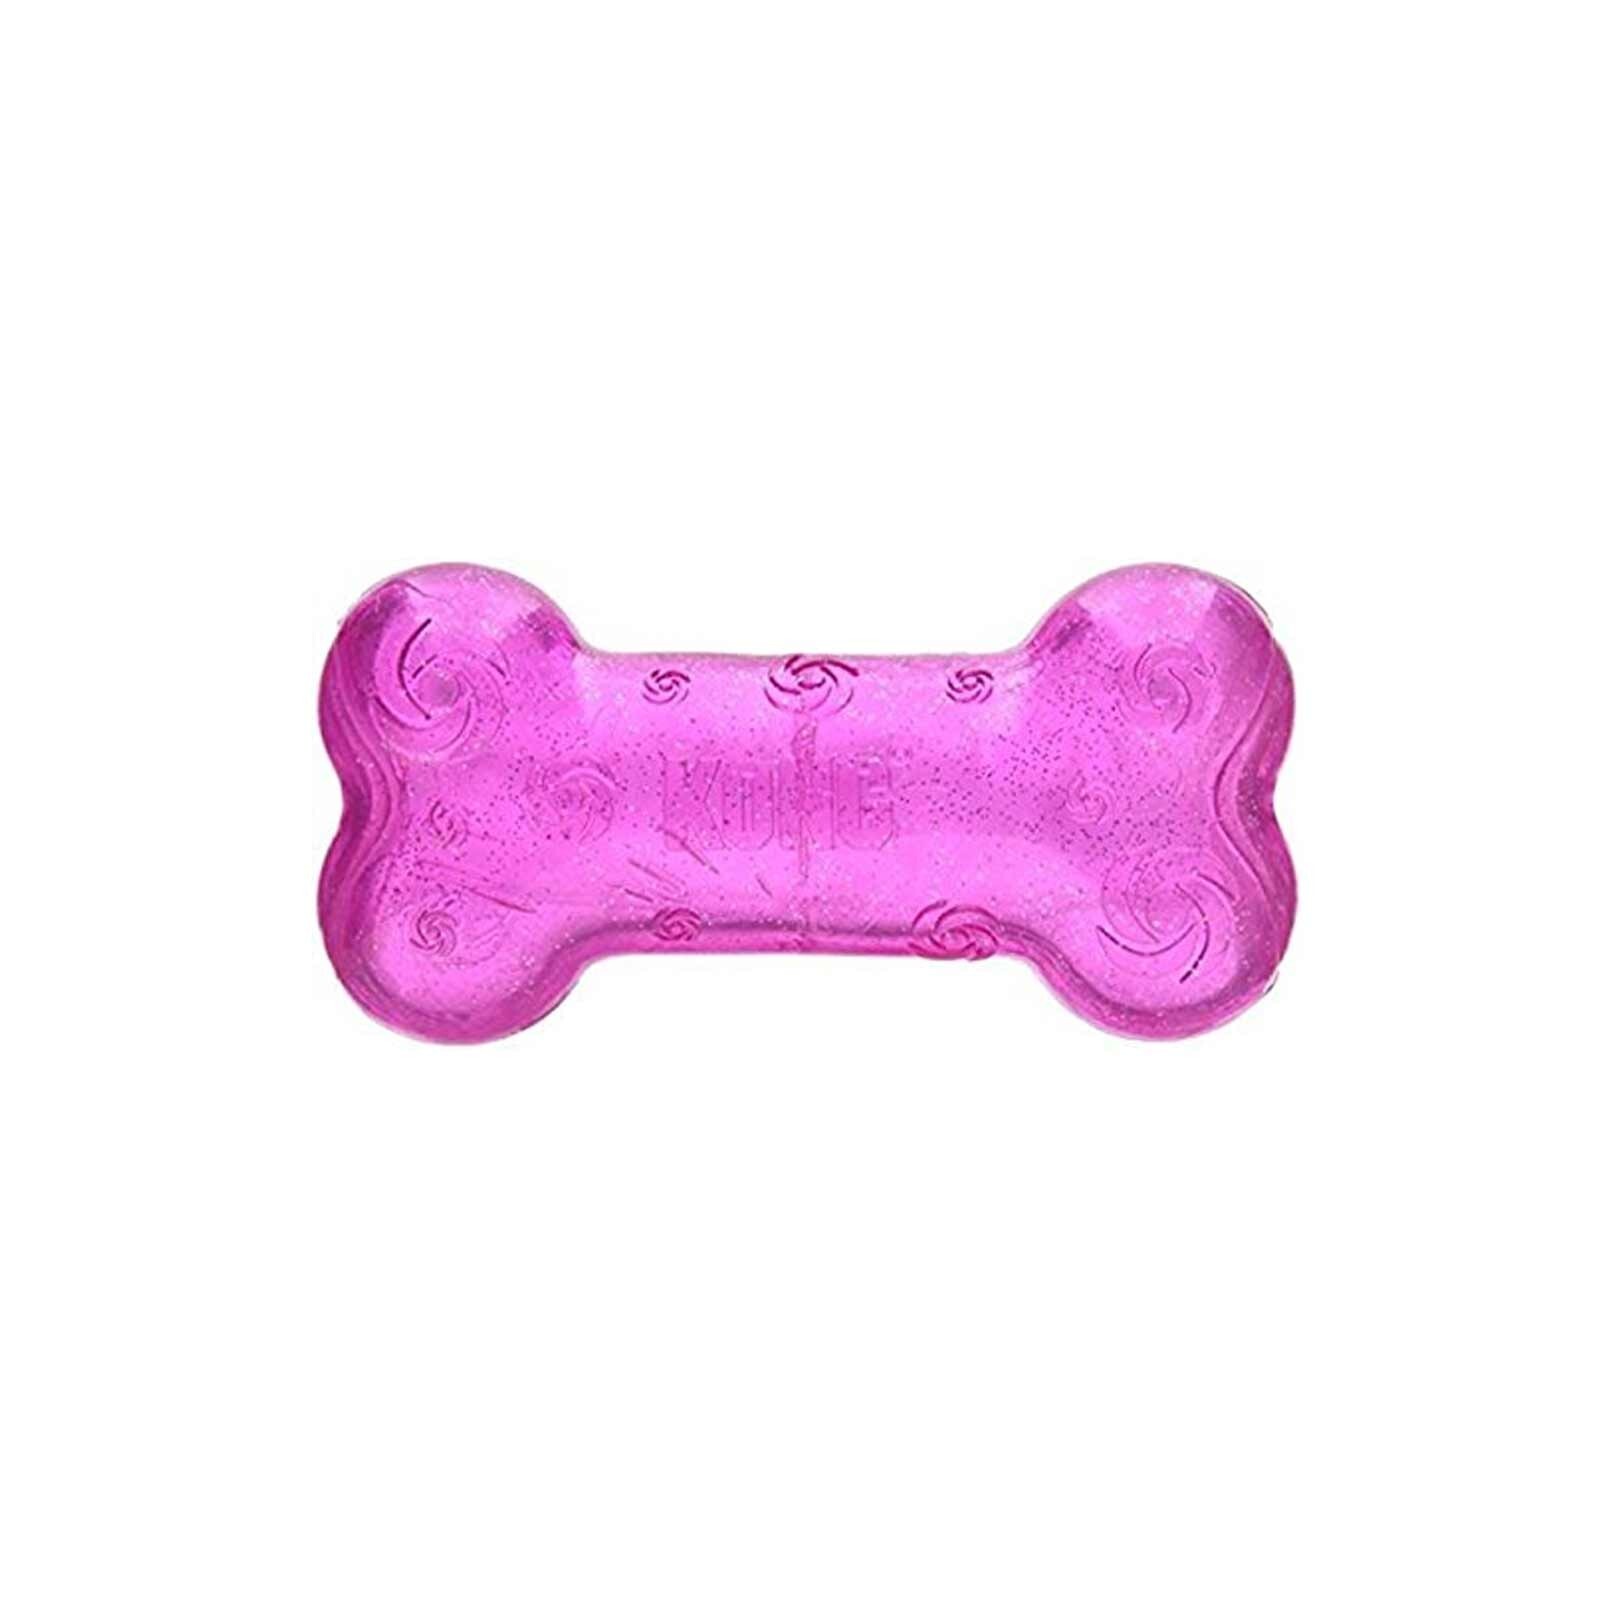 4 x KONG Squeezz Crackle Textured Glitter Bone Dog Toy in Assorted Colours - Medium image 0